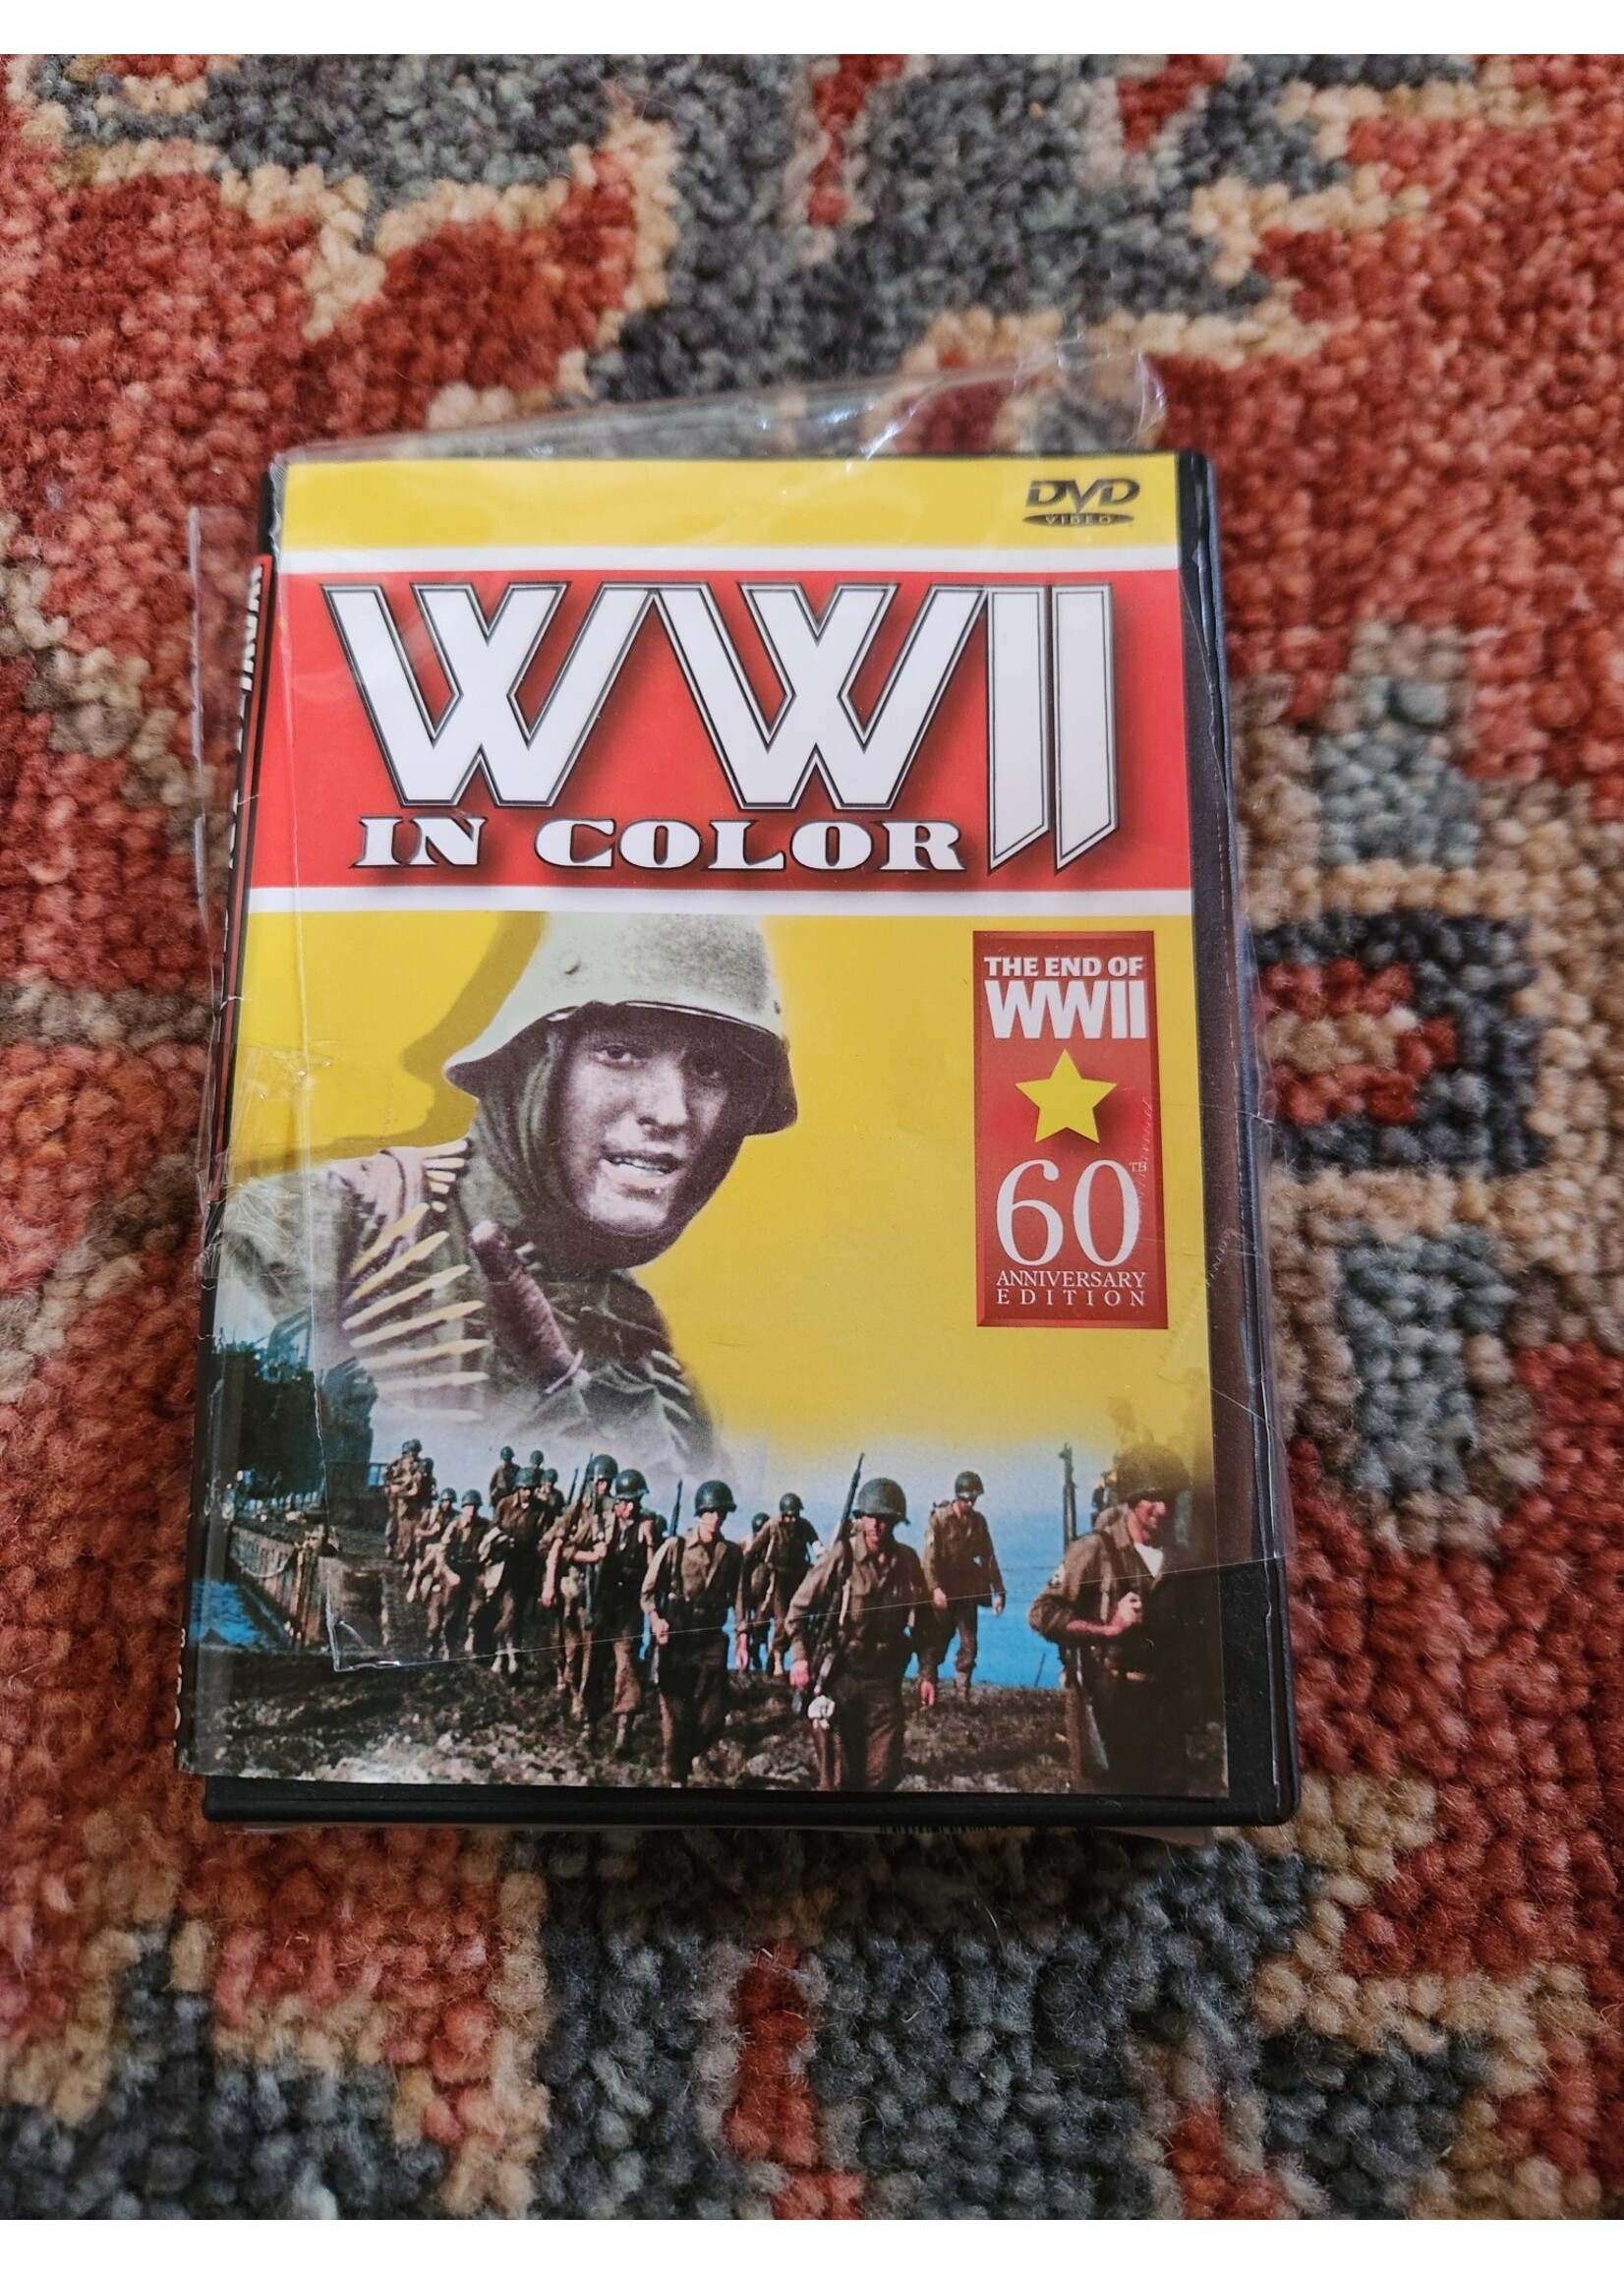 DVD WWII In Color Volume 1